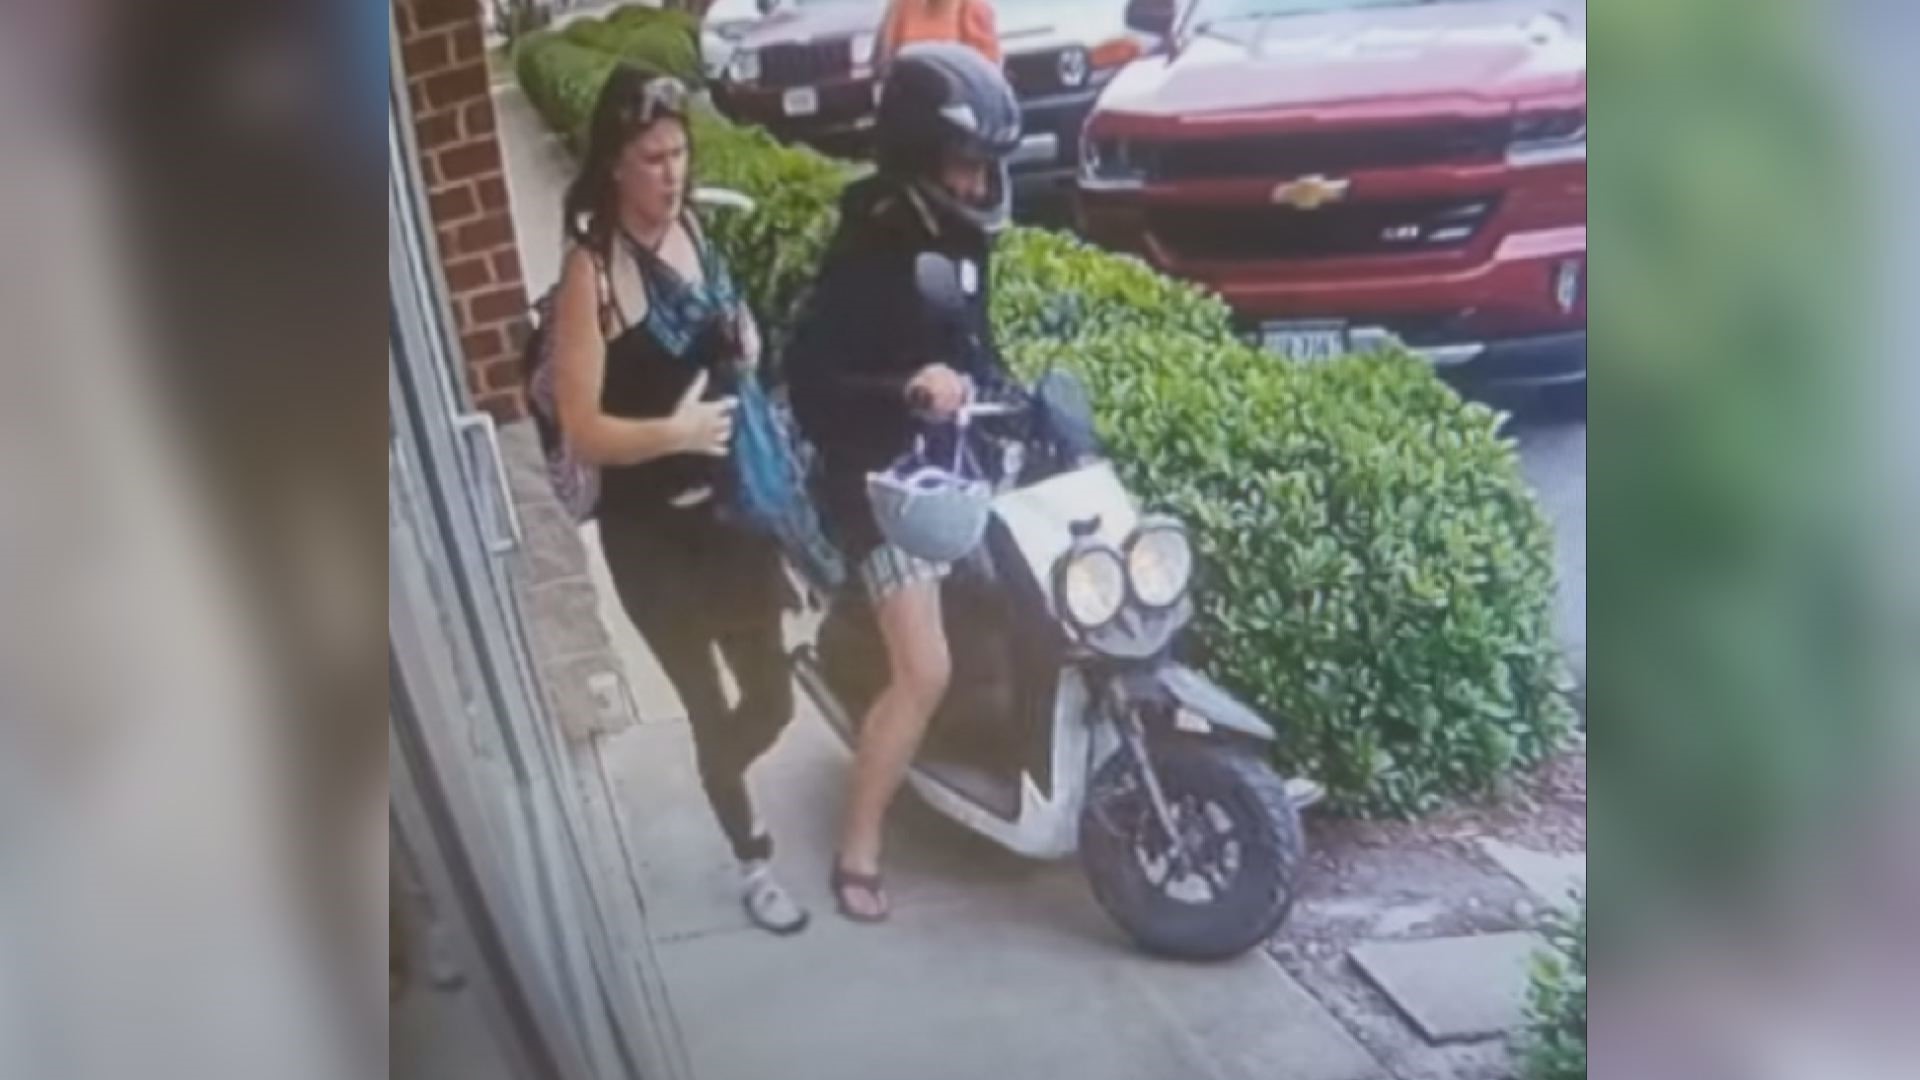 Thrift Store USA posted this video of two suspects who allegedly stole a bunch of clothes from the store before making their getaway on a moped.